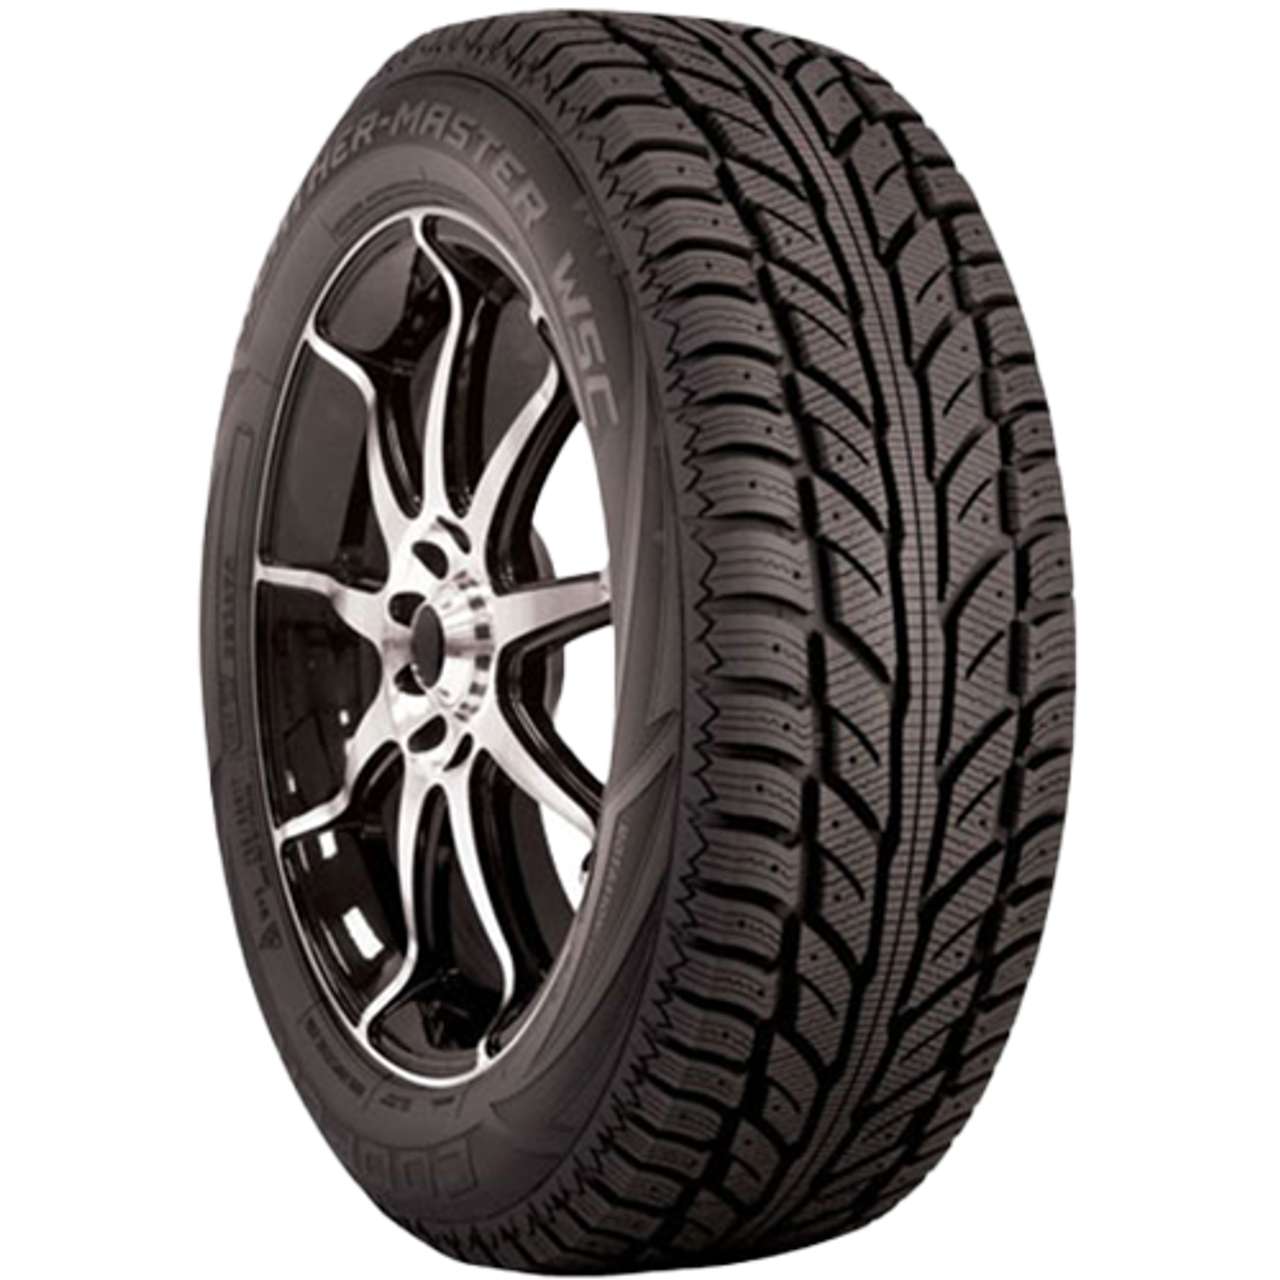 COOPER WEATHERMASTER WSC 225/60R18 100T STUDDABLE BSW